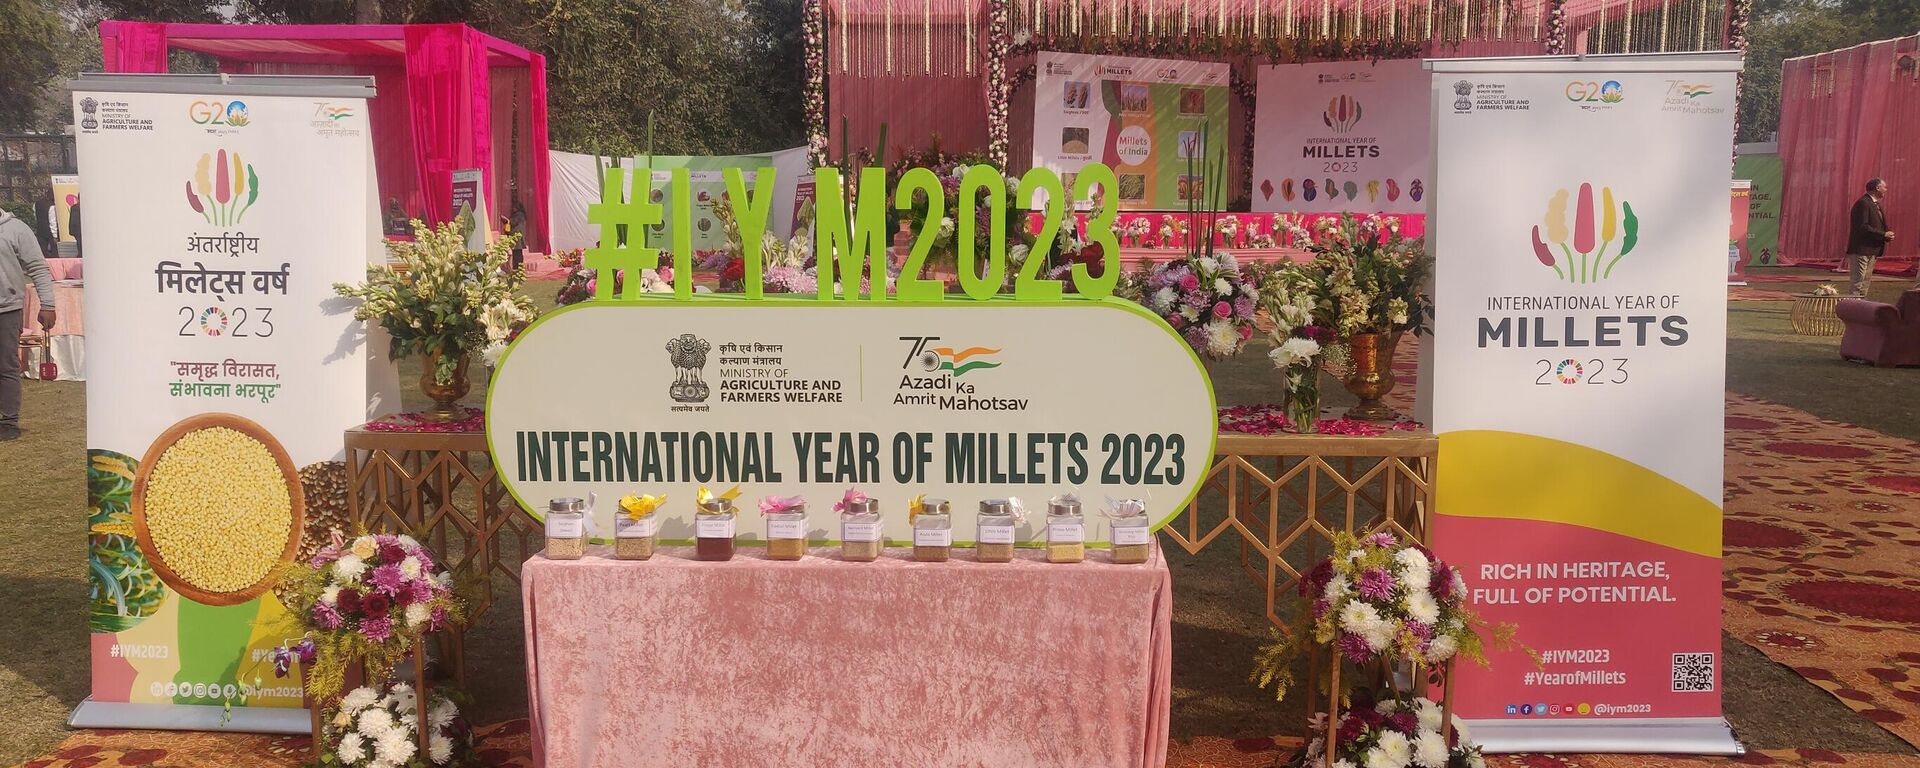 2023 is International Year of The Millet by United Nation - Sputnik India, 1920, 05.01.2023